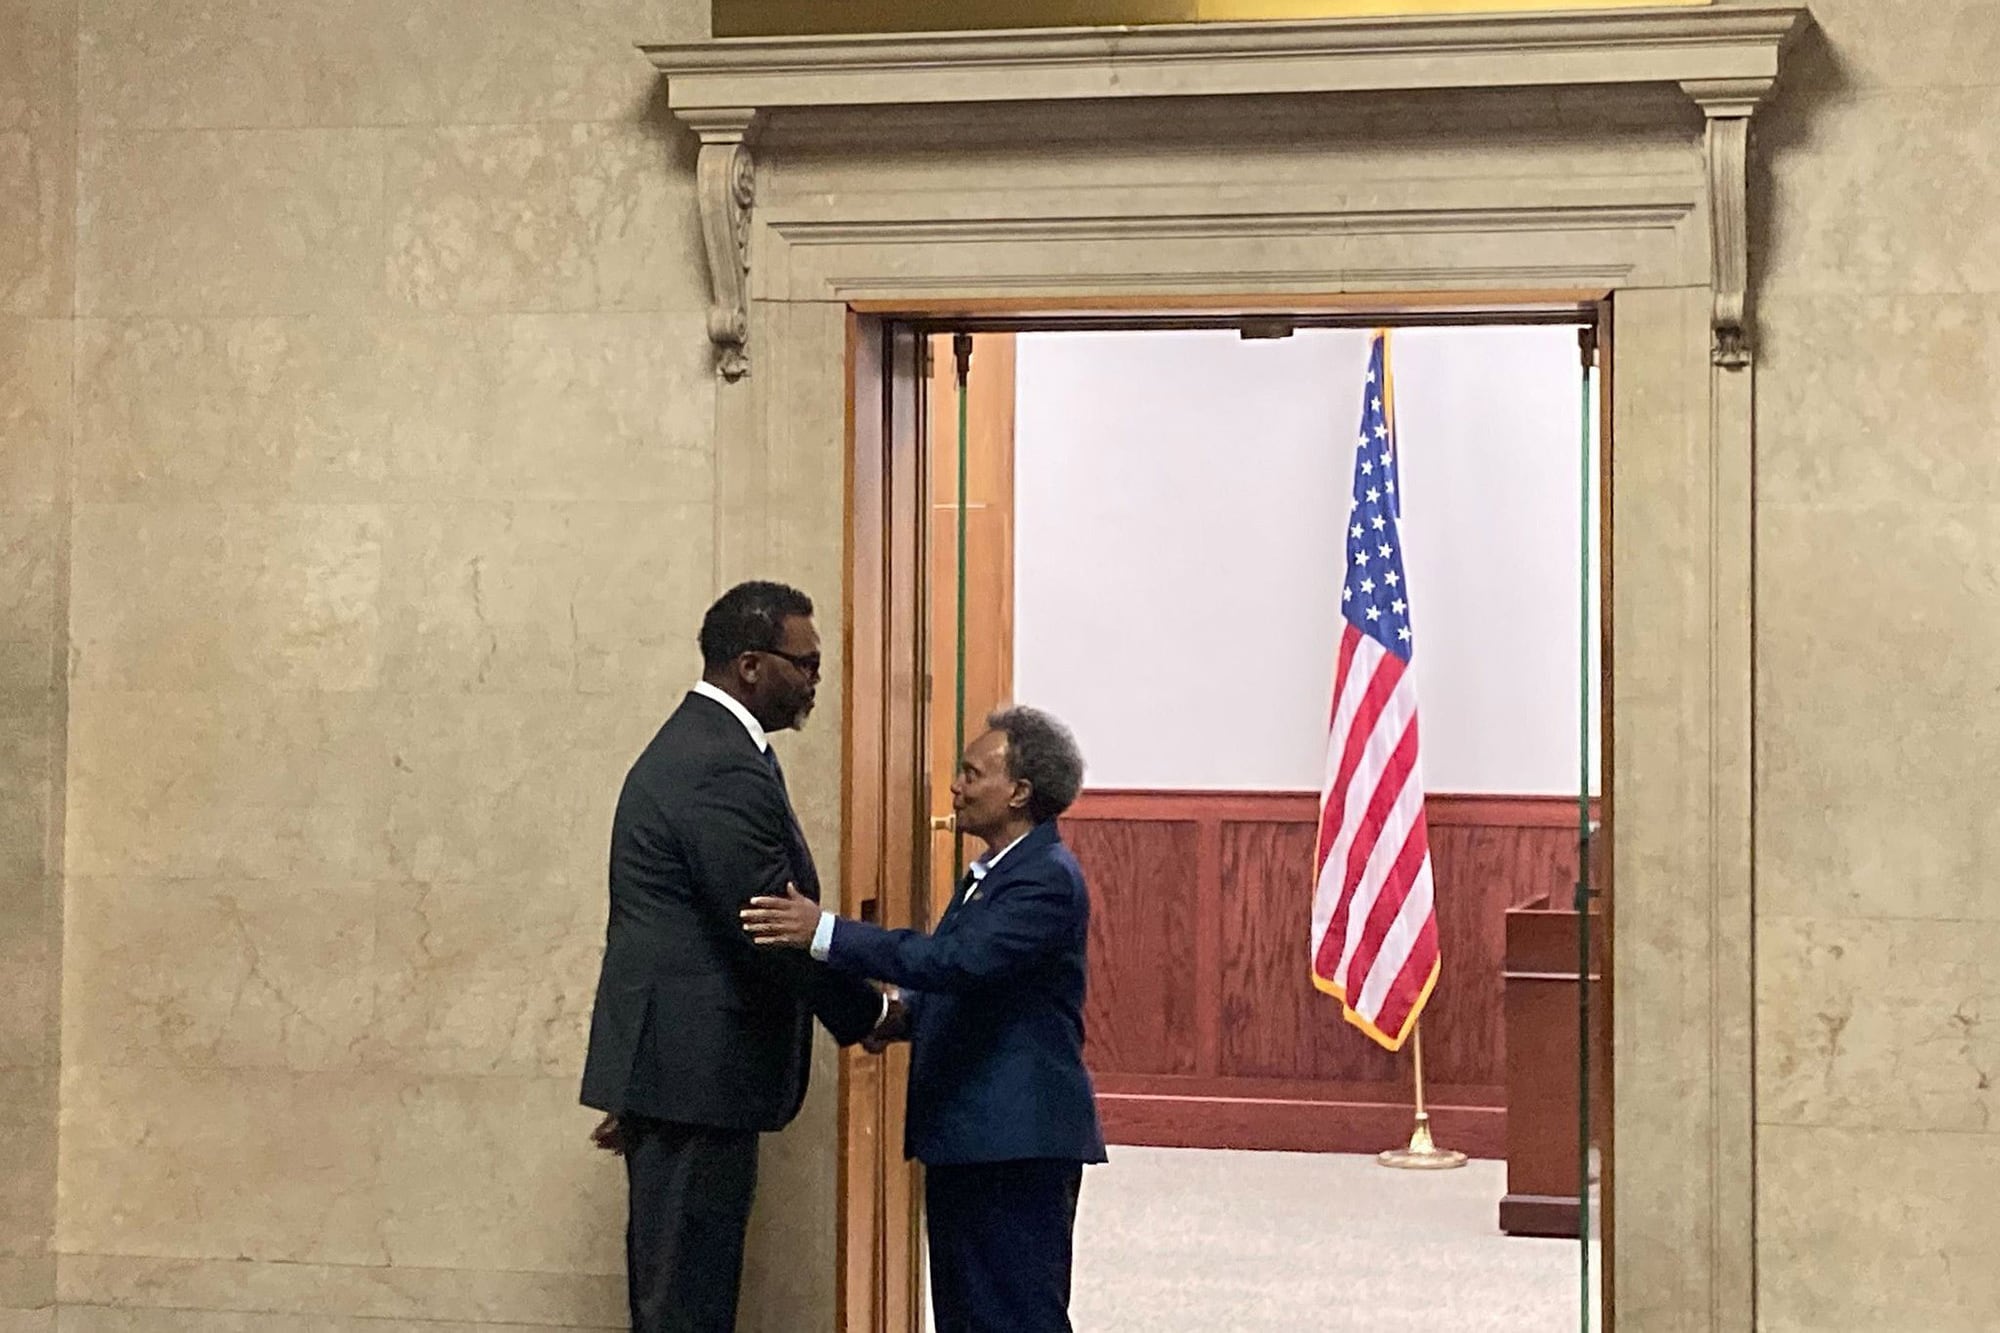 Chicago Mayor-elect Brandon Johnson shakes hands with current Mayor Lori Lightfoot. They are both wearing dark suits and standing in front of a doorway. A U.S. flag is in the background.